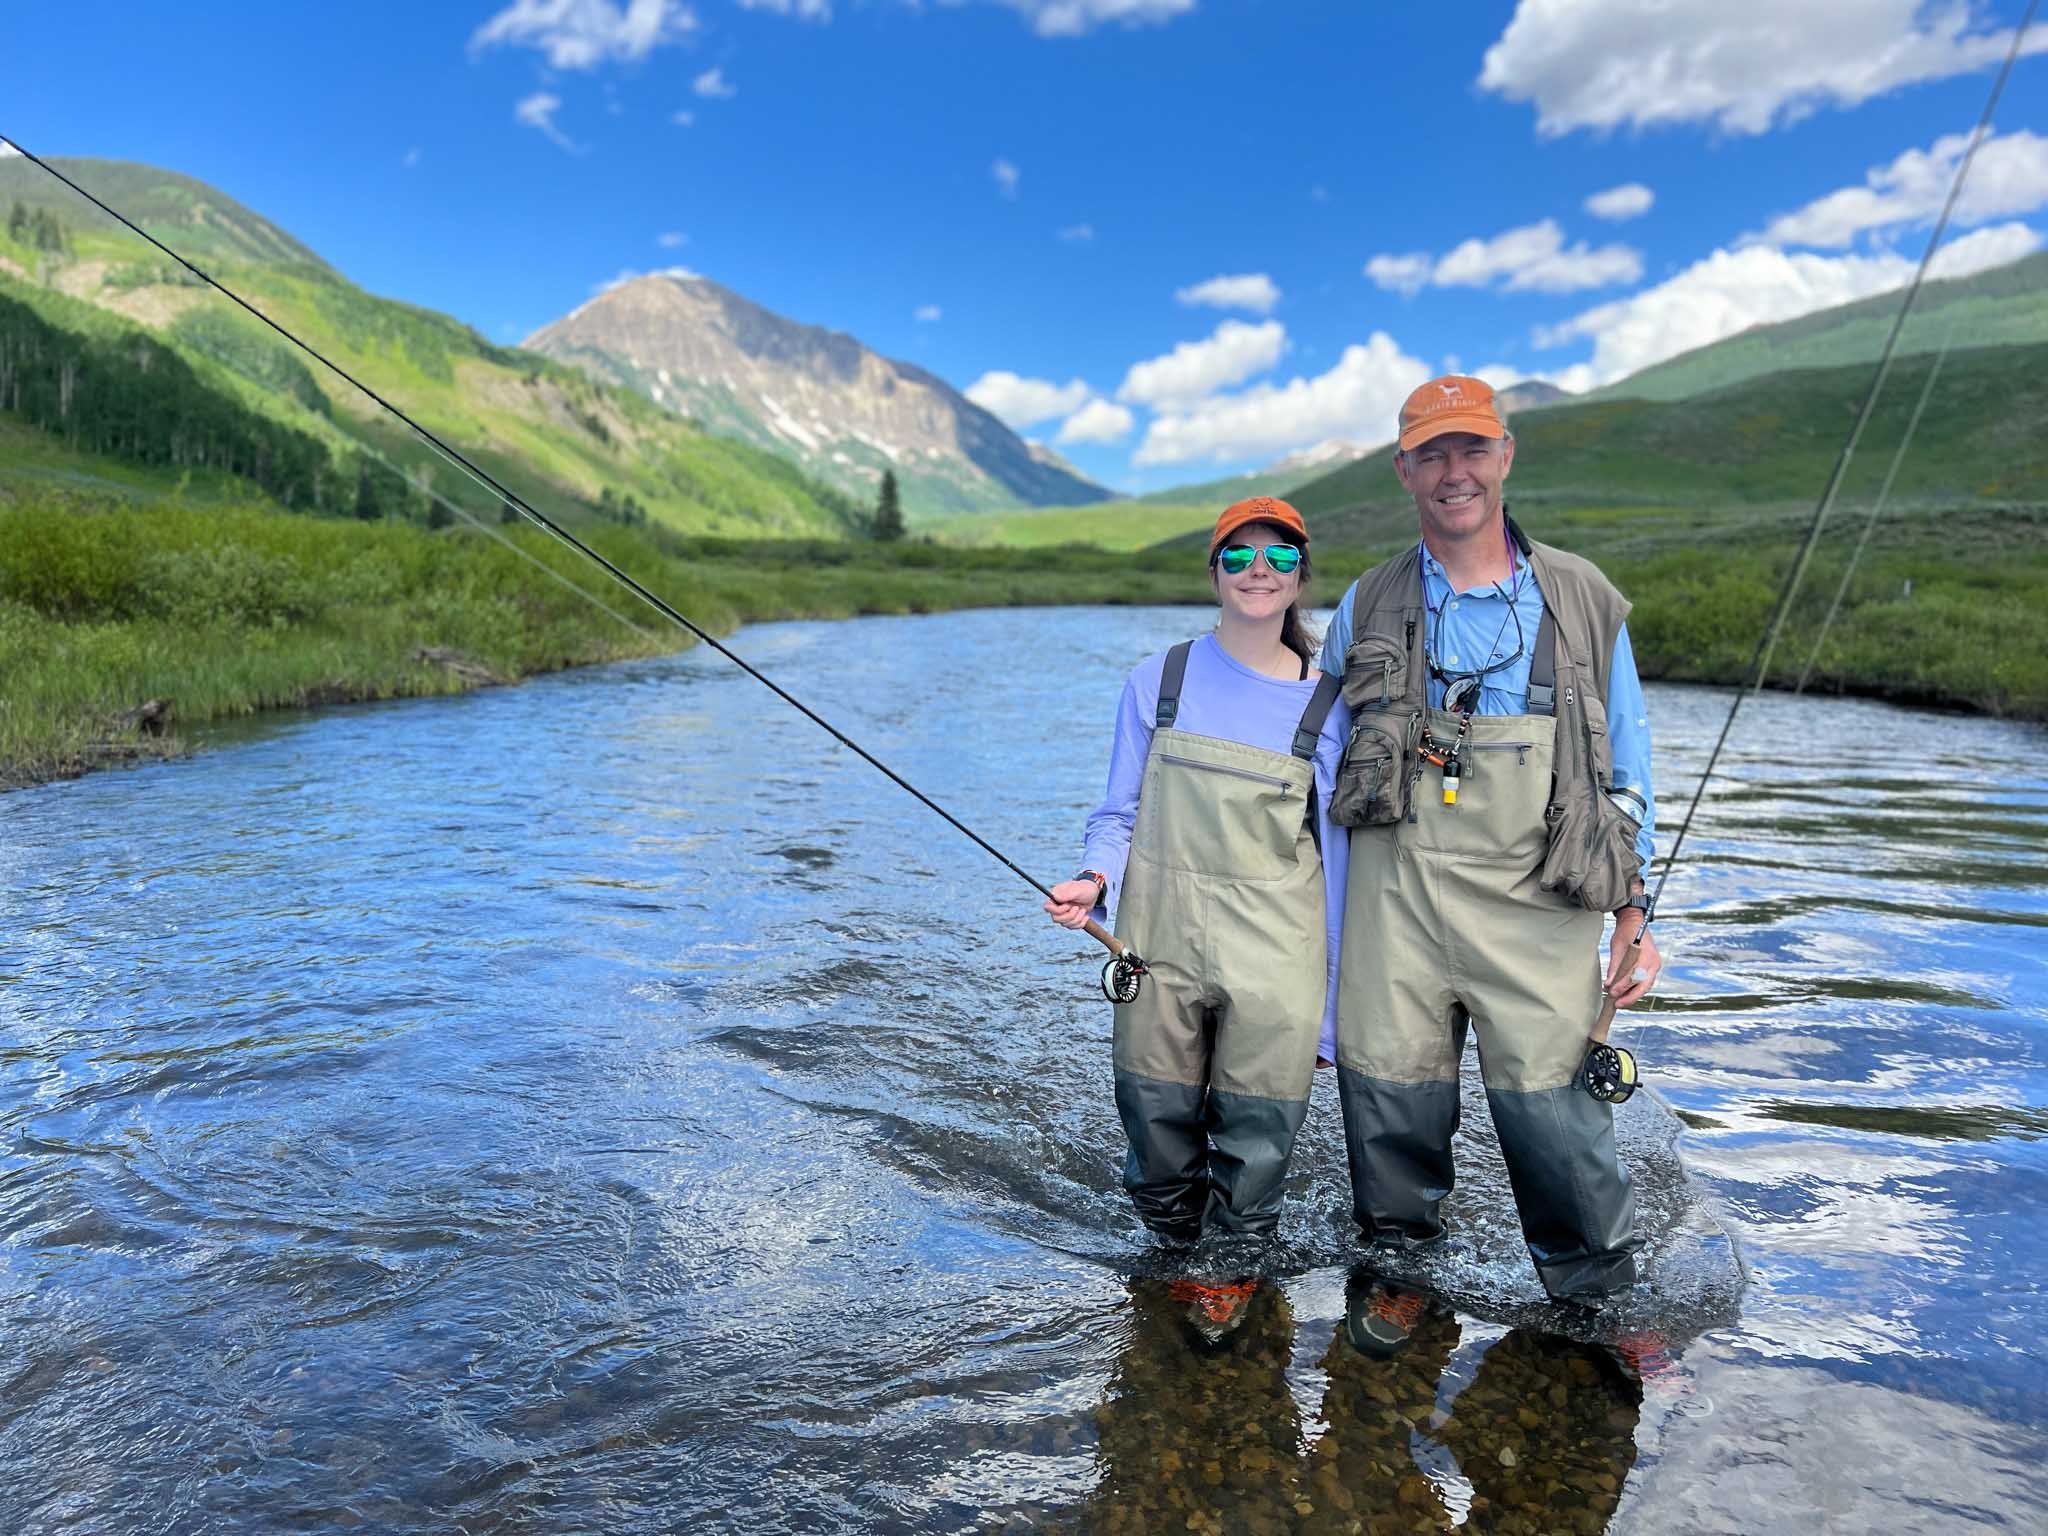 10 Reasons to Fly Fish With Your Kid — Jones Guides